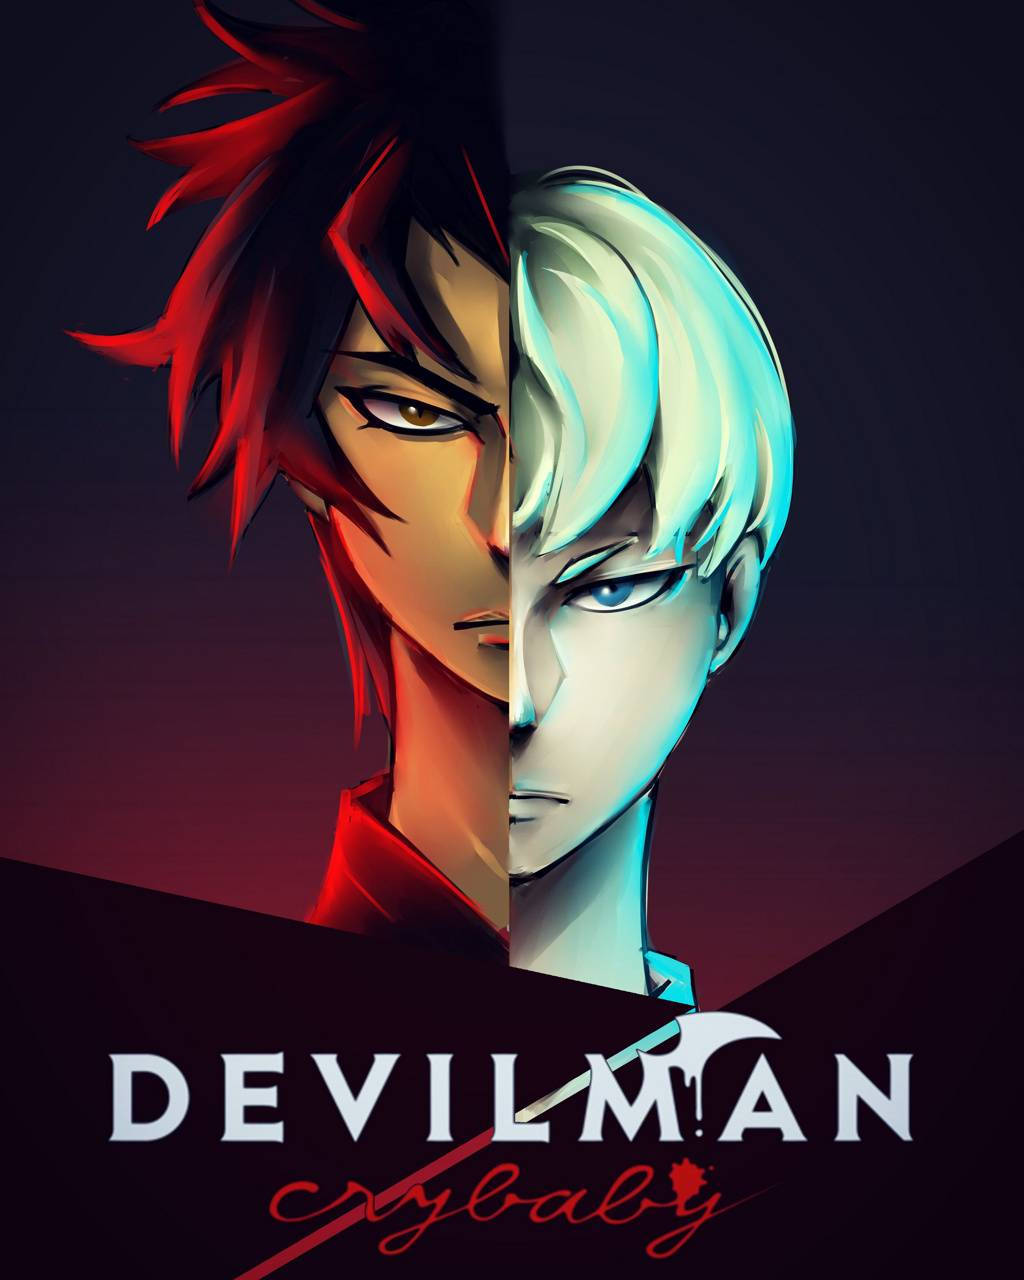 Enter the dark and enigmatic world of Devilman Crybaby. Wallpaper